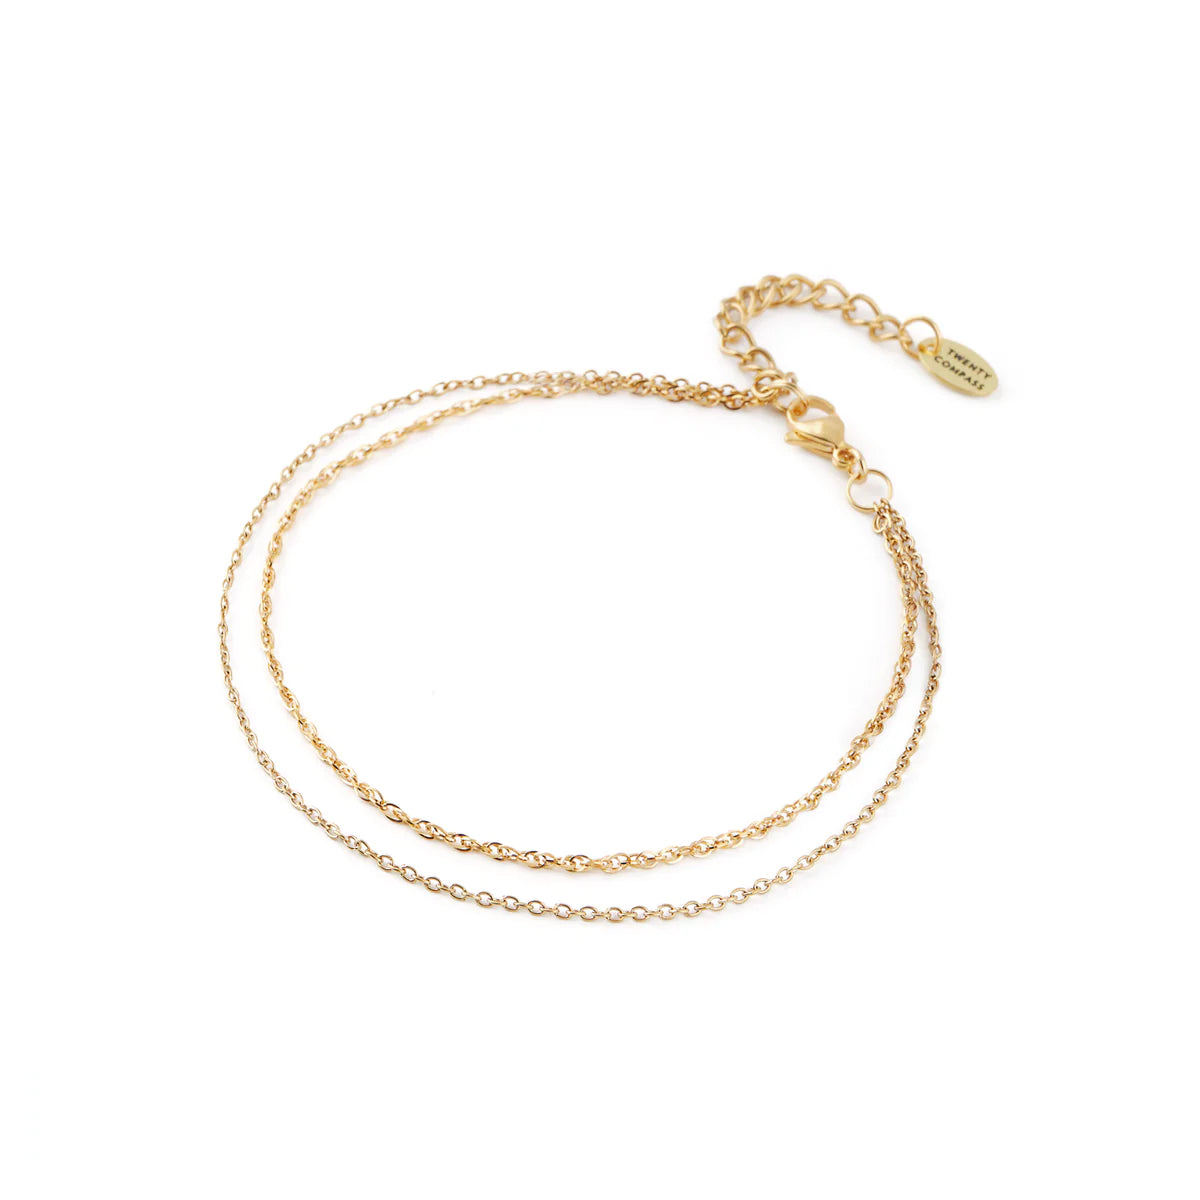 Anklet by Twenty Compass